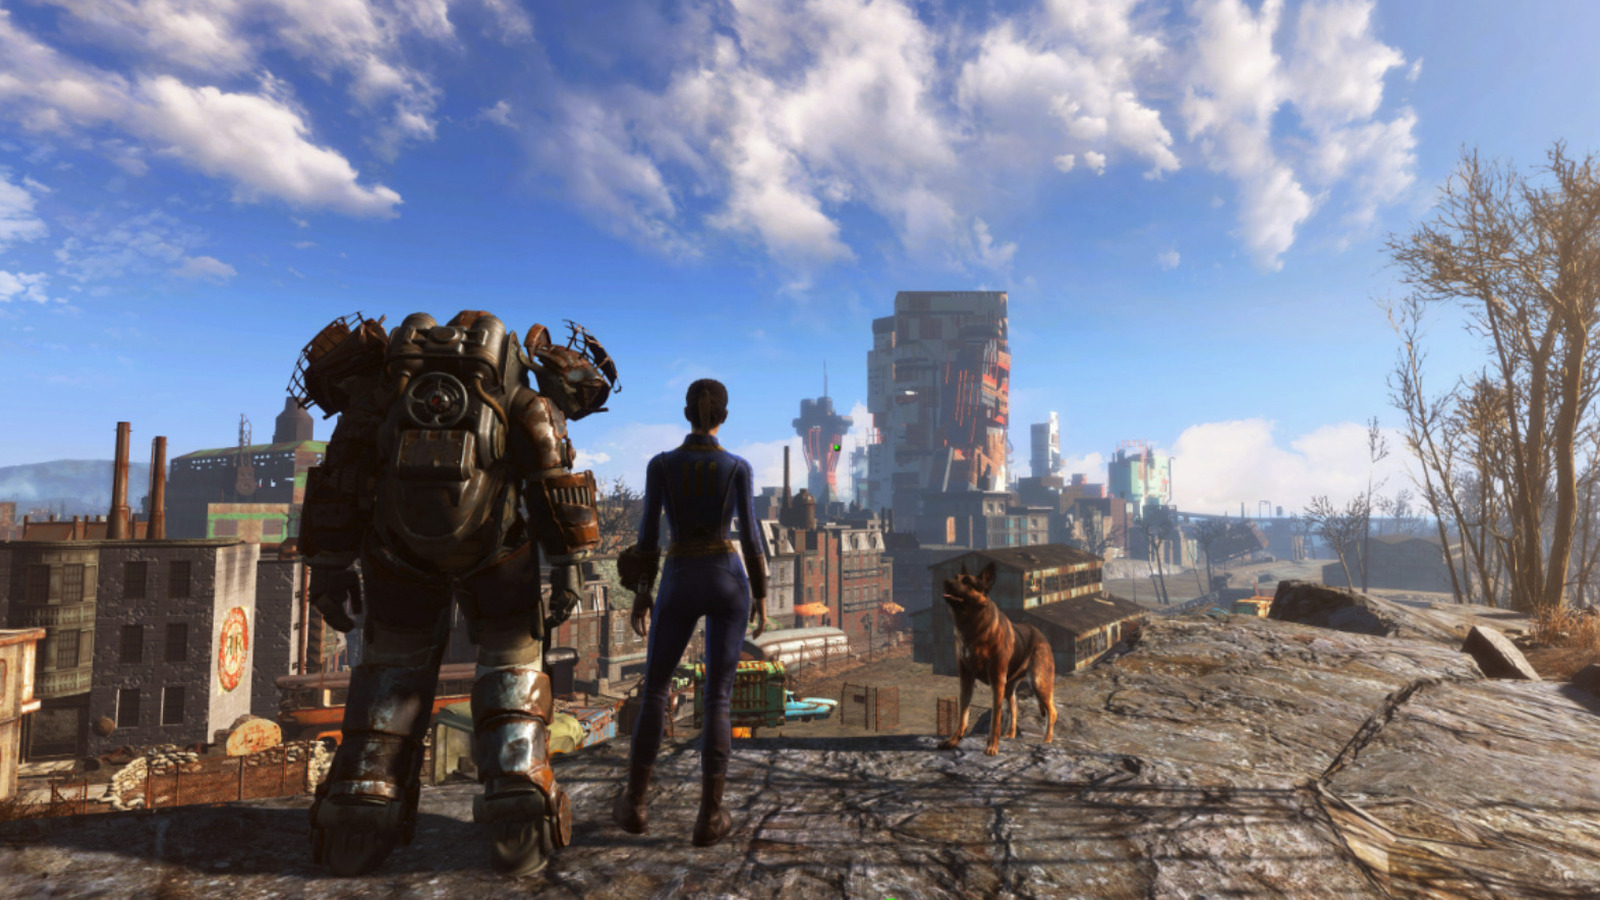 #Fallout TV Series: Everything We Know So Far